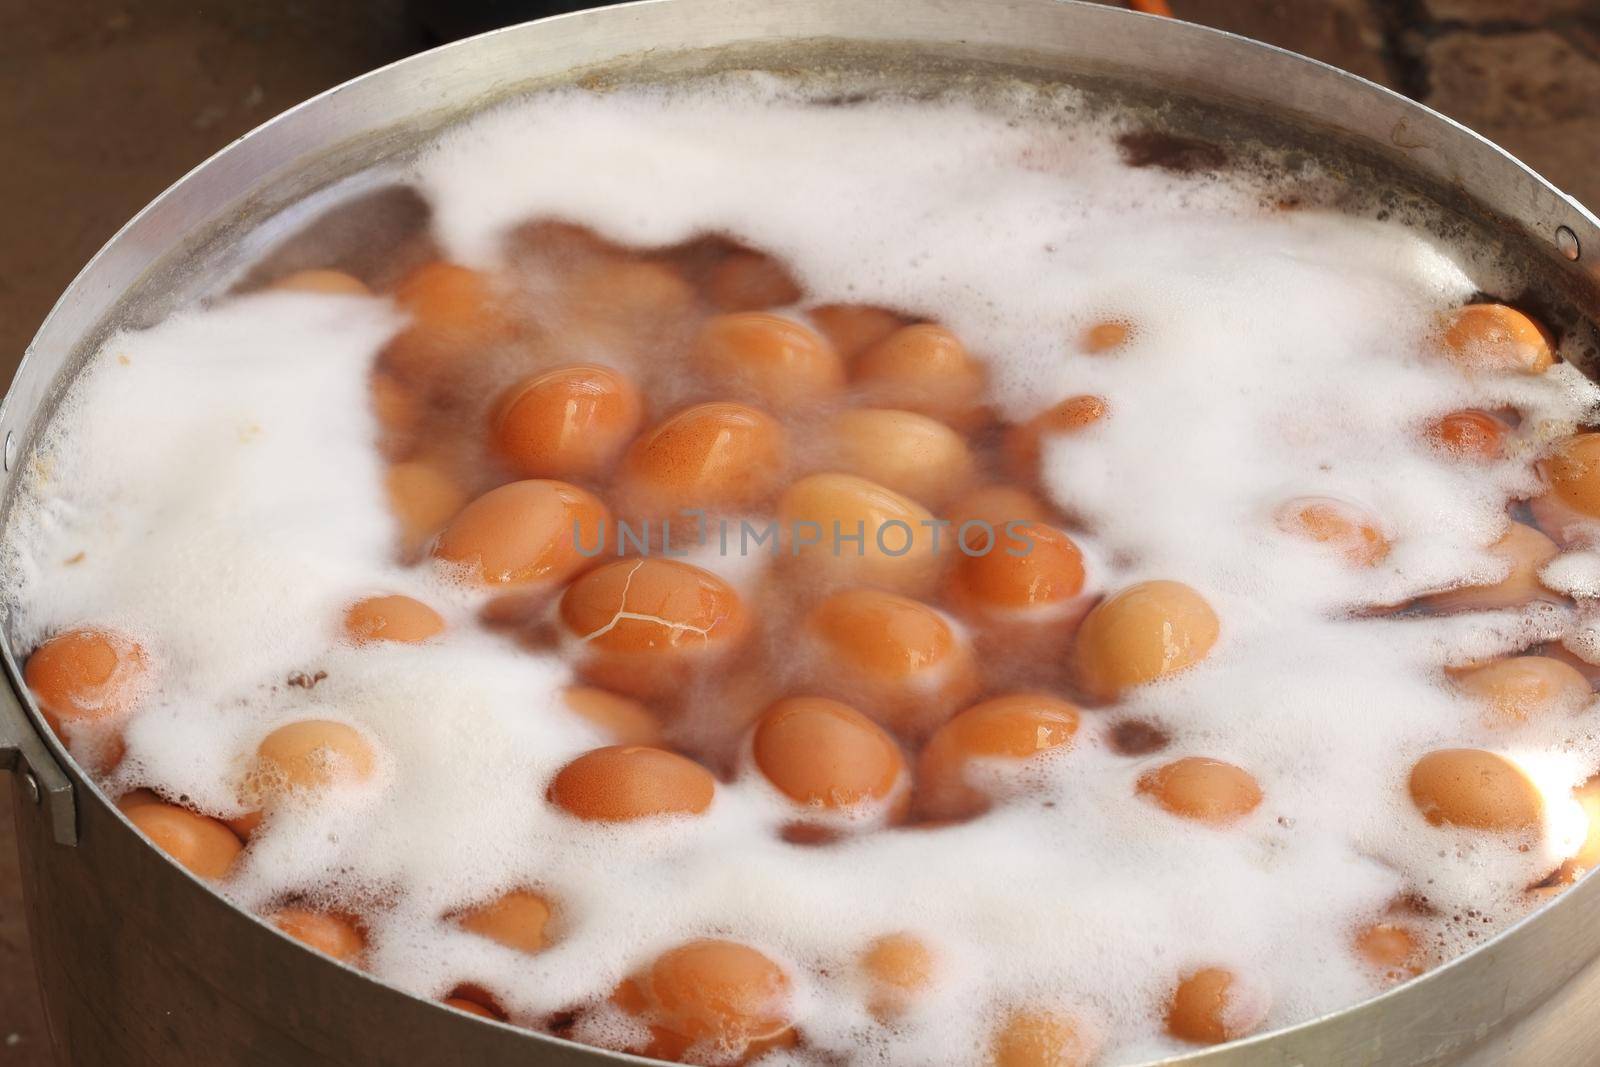 Eggs boiled with water in the pot by geargodz